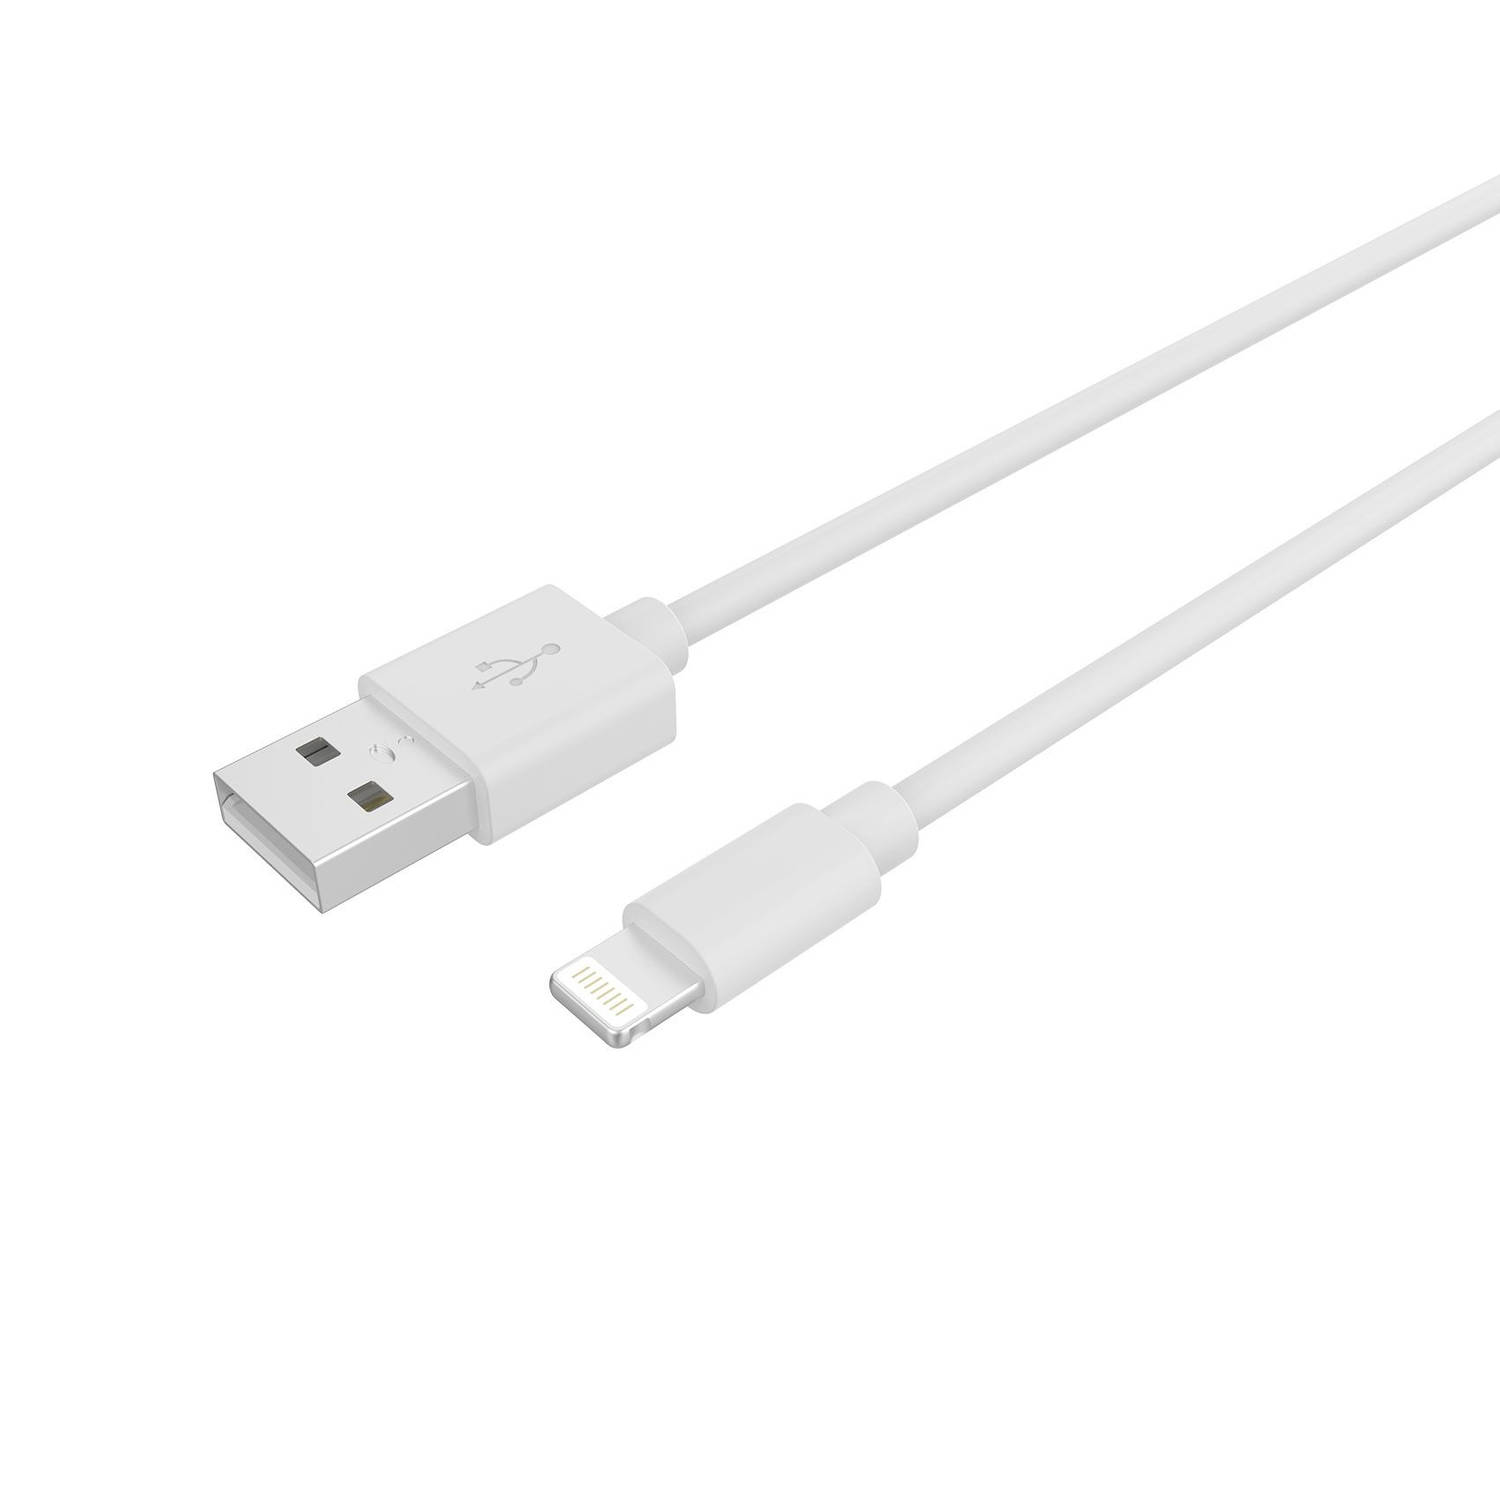 Usb-lightning Kabel, 1 Meter, Wit Celly Procompact